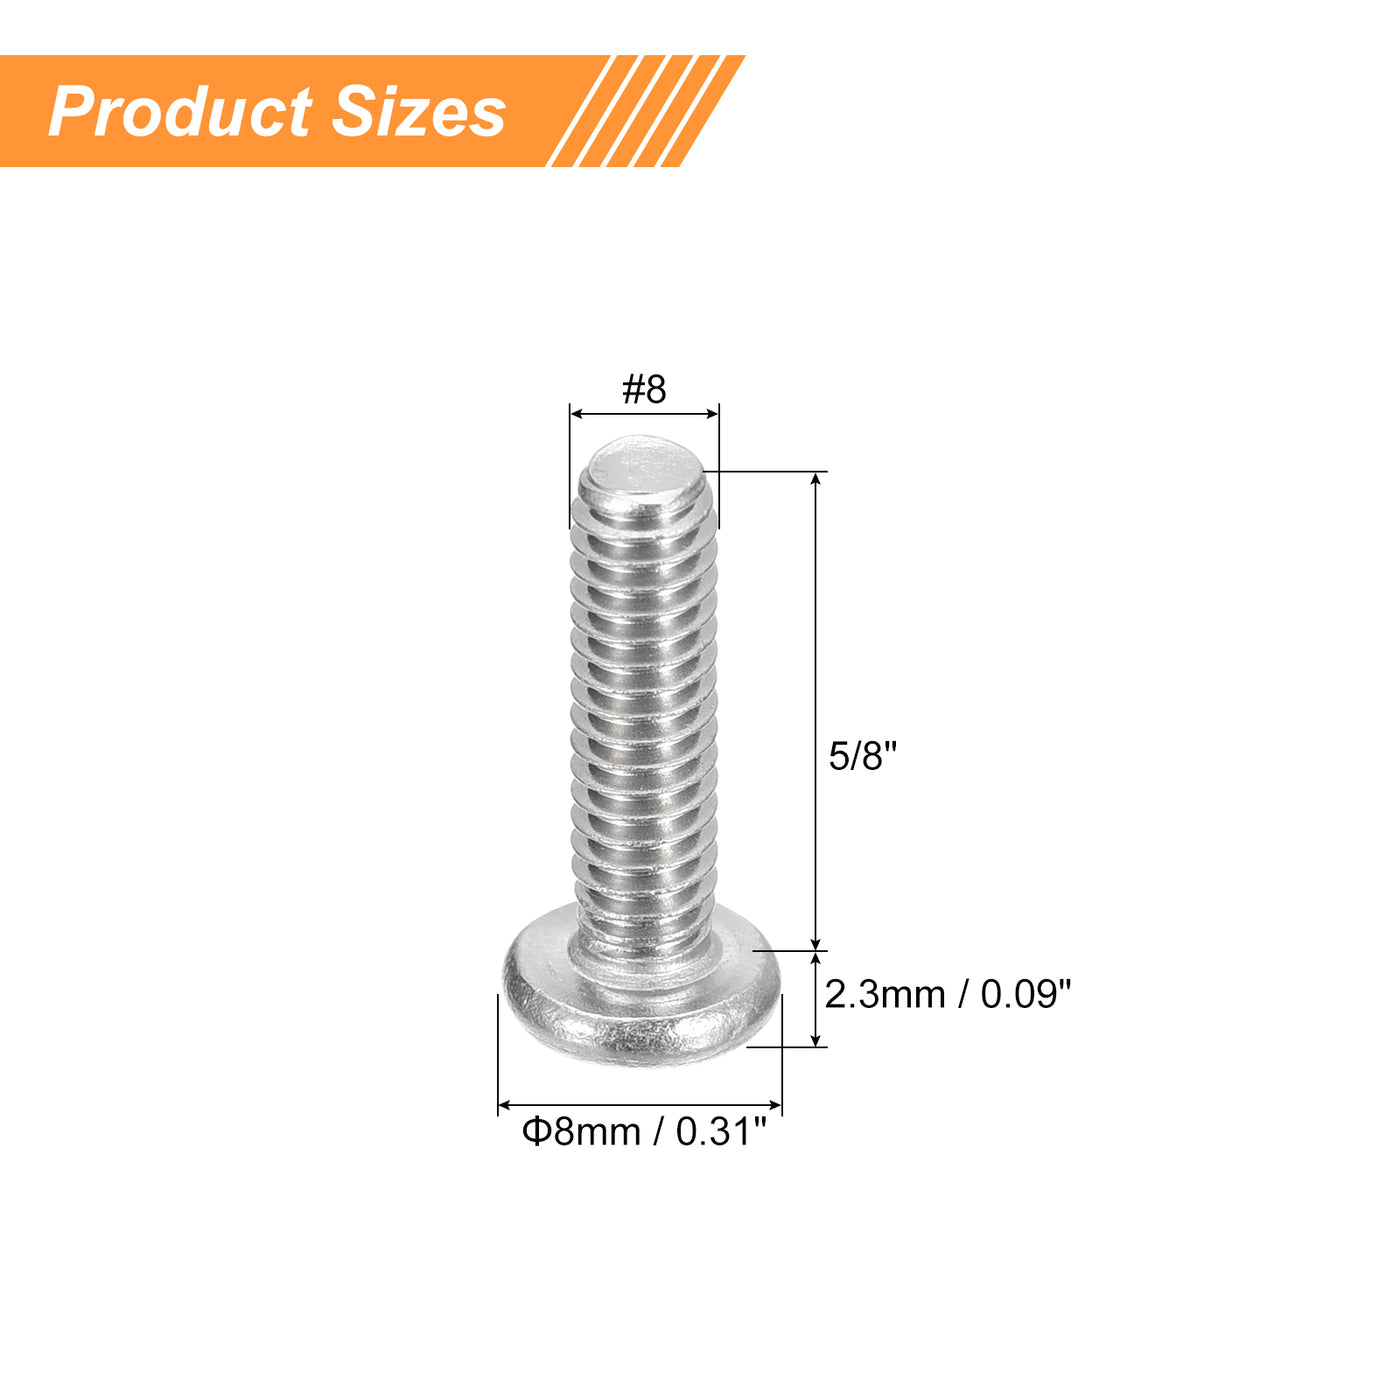 uxcell Uxcell #8-32x5/8" Pan Head Machine Screws, Stainless Steel 18-8 Screw, Pack of 100